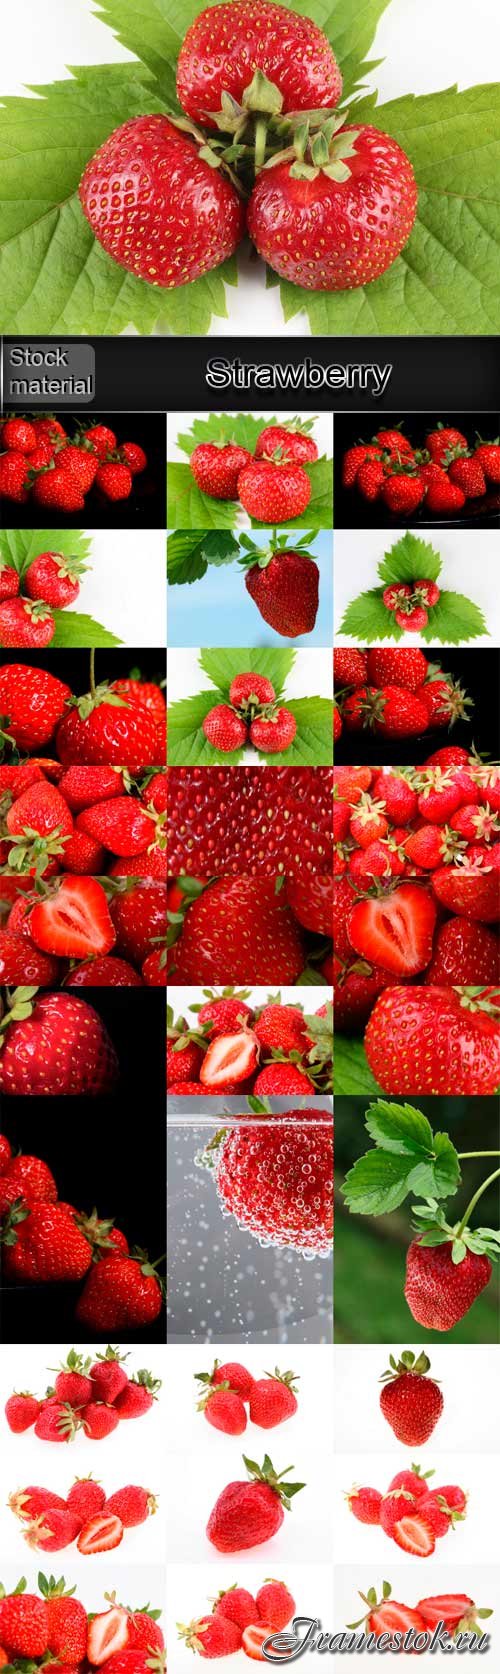 Tasty and healthy food. Strawberry